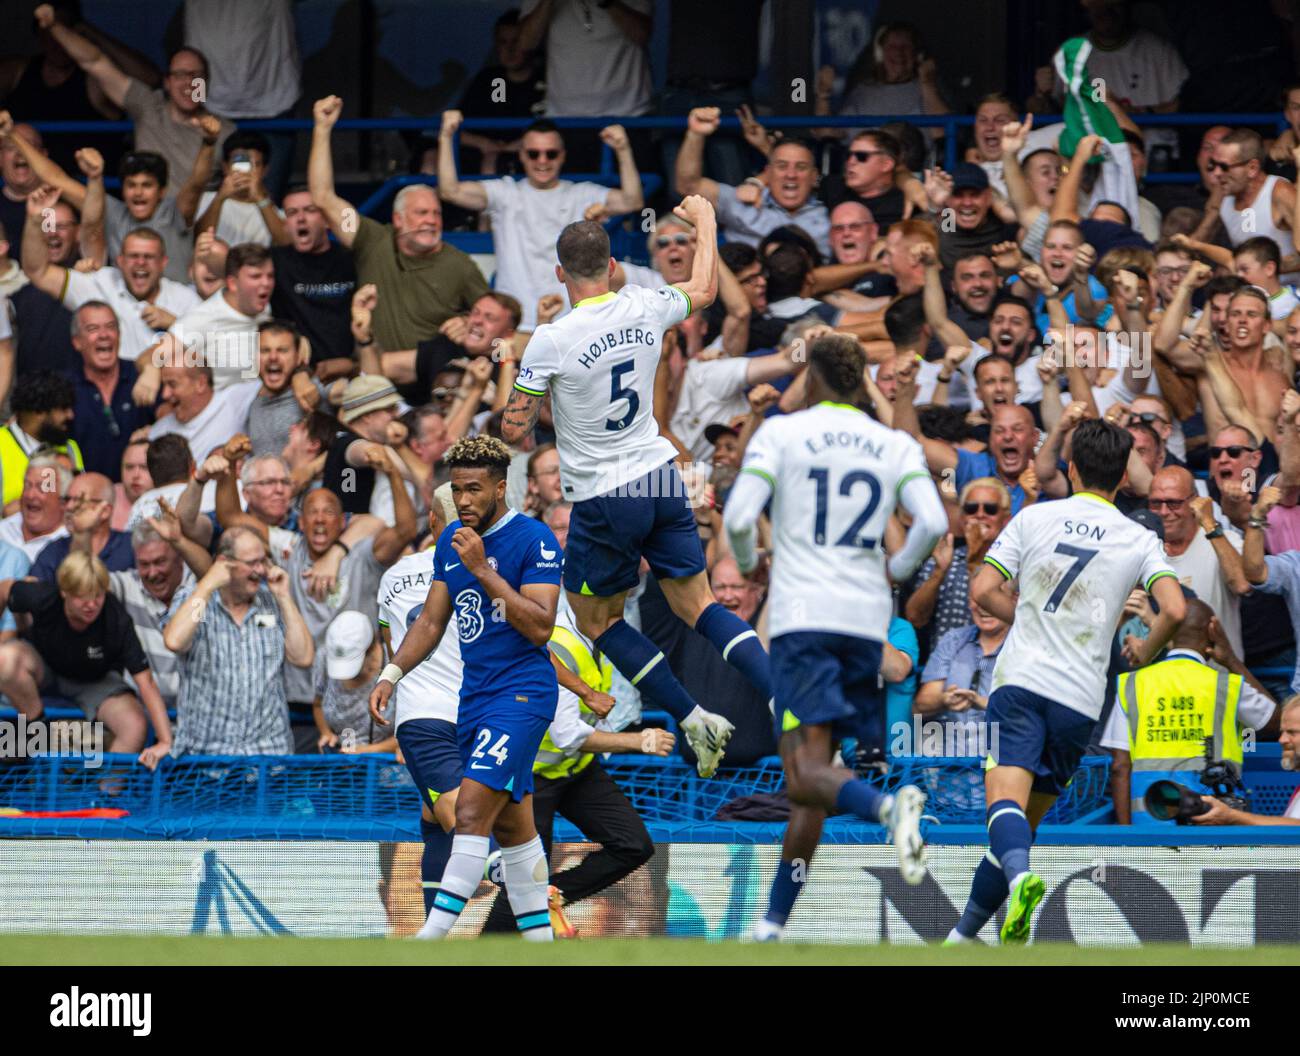 London, UK. 15th Aug, 2022. Tottenham Hotspur's Pierre-Emile Hojbjerg (up) celebrates after scoring during the English Premier League match between Chelsea and Tottenham Hotspur in London, Britain, on Aug. 14, 2022. The game ended in a 2-2 draw. Credit: Xinhua/Alamy Live News Stock Photo